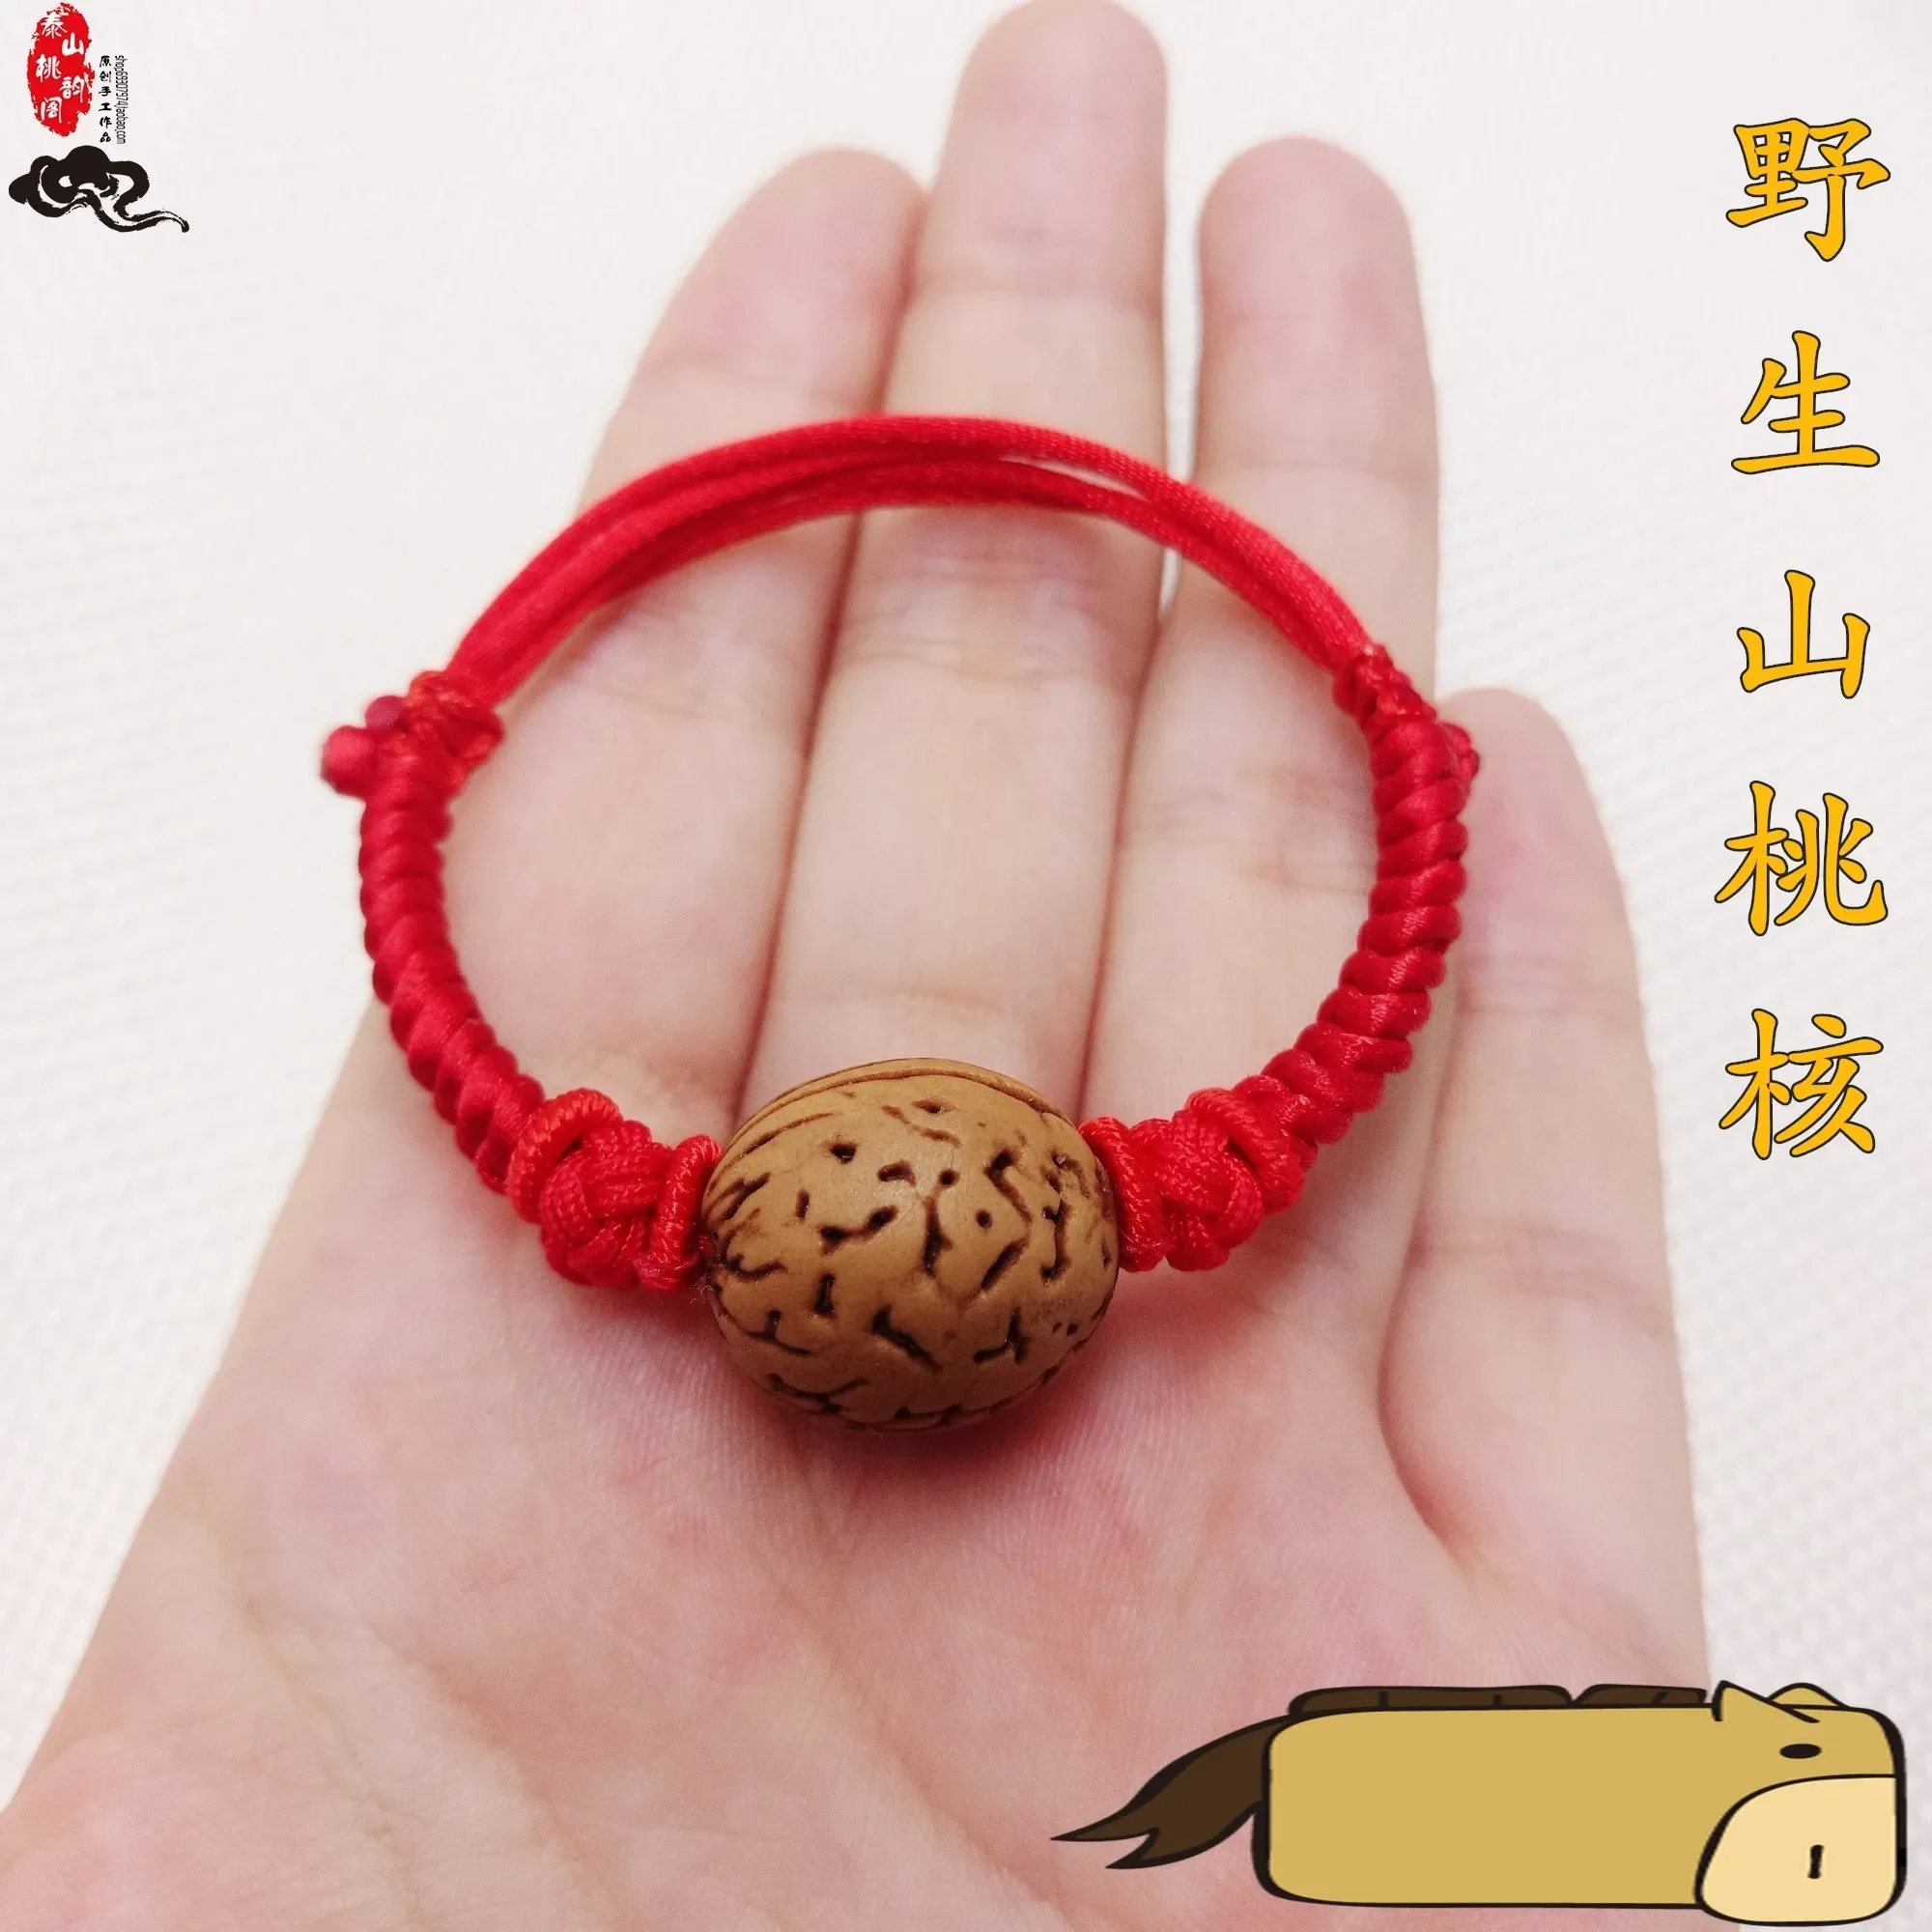 Adult Baby Infant Child Peach Hu Amulet ya jing Anti-Shock Bracelets Peach Pit Wood Year of Fate Concentration Red Anklets